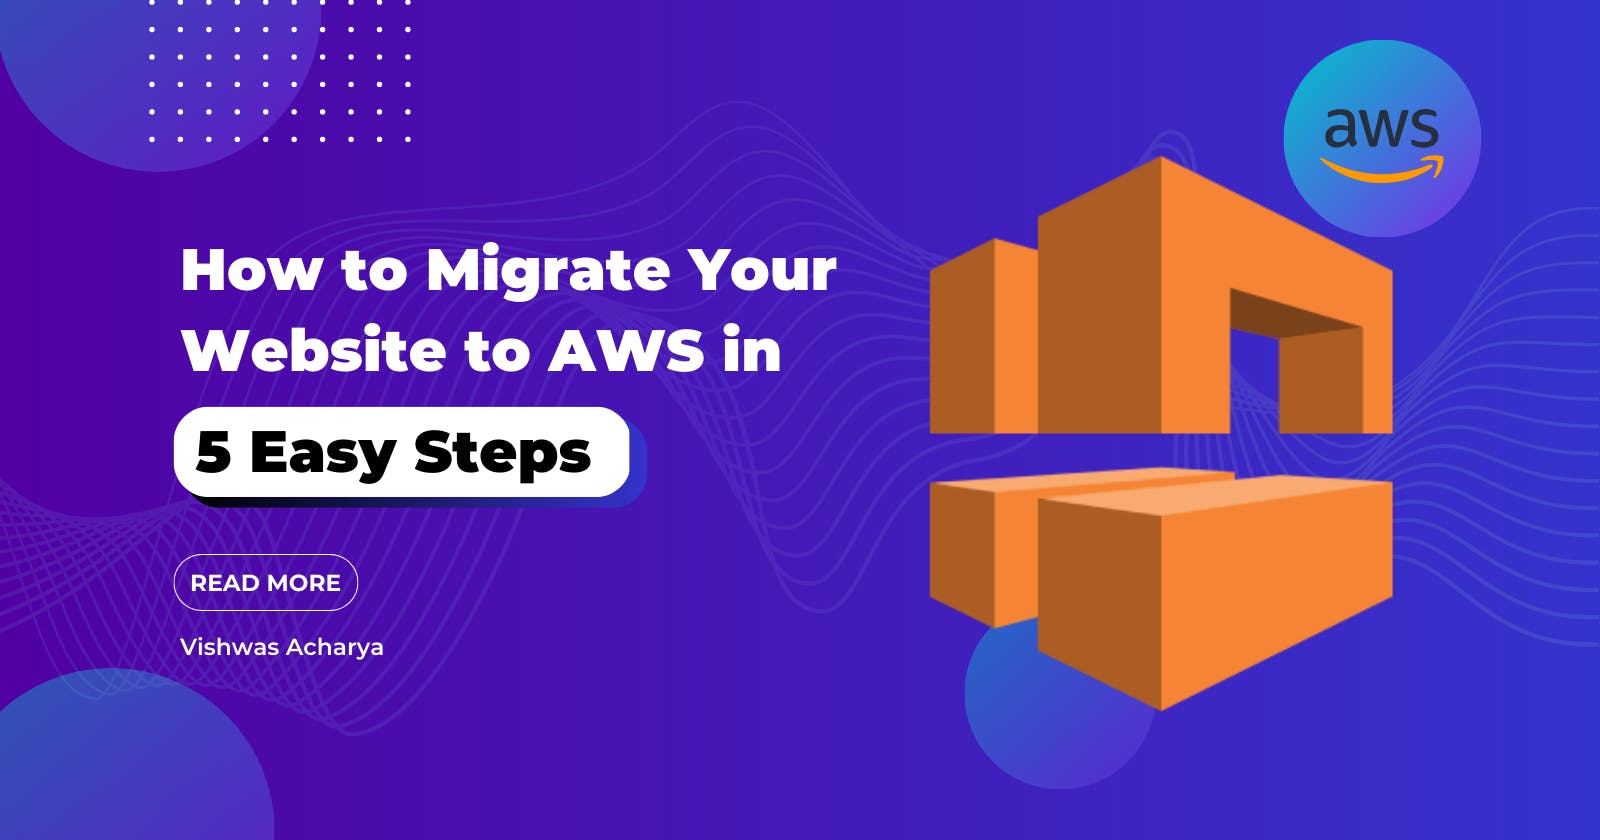 How to Migrate Your Website to AWS in 5 Easy Steps